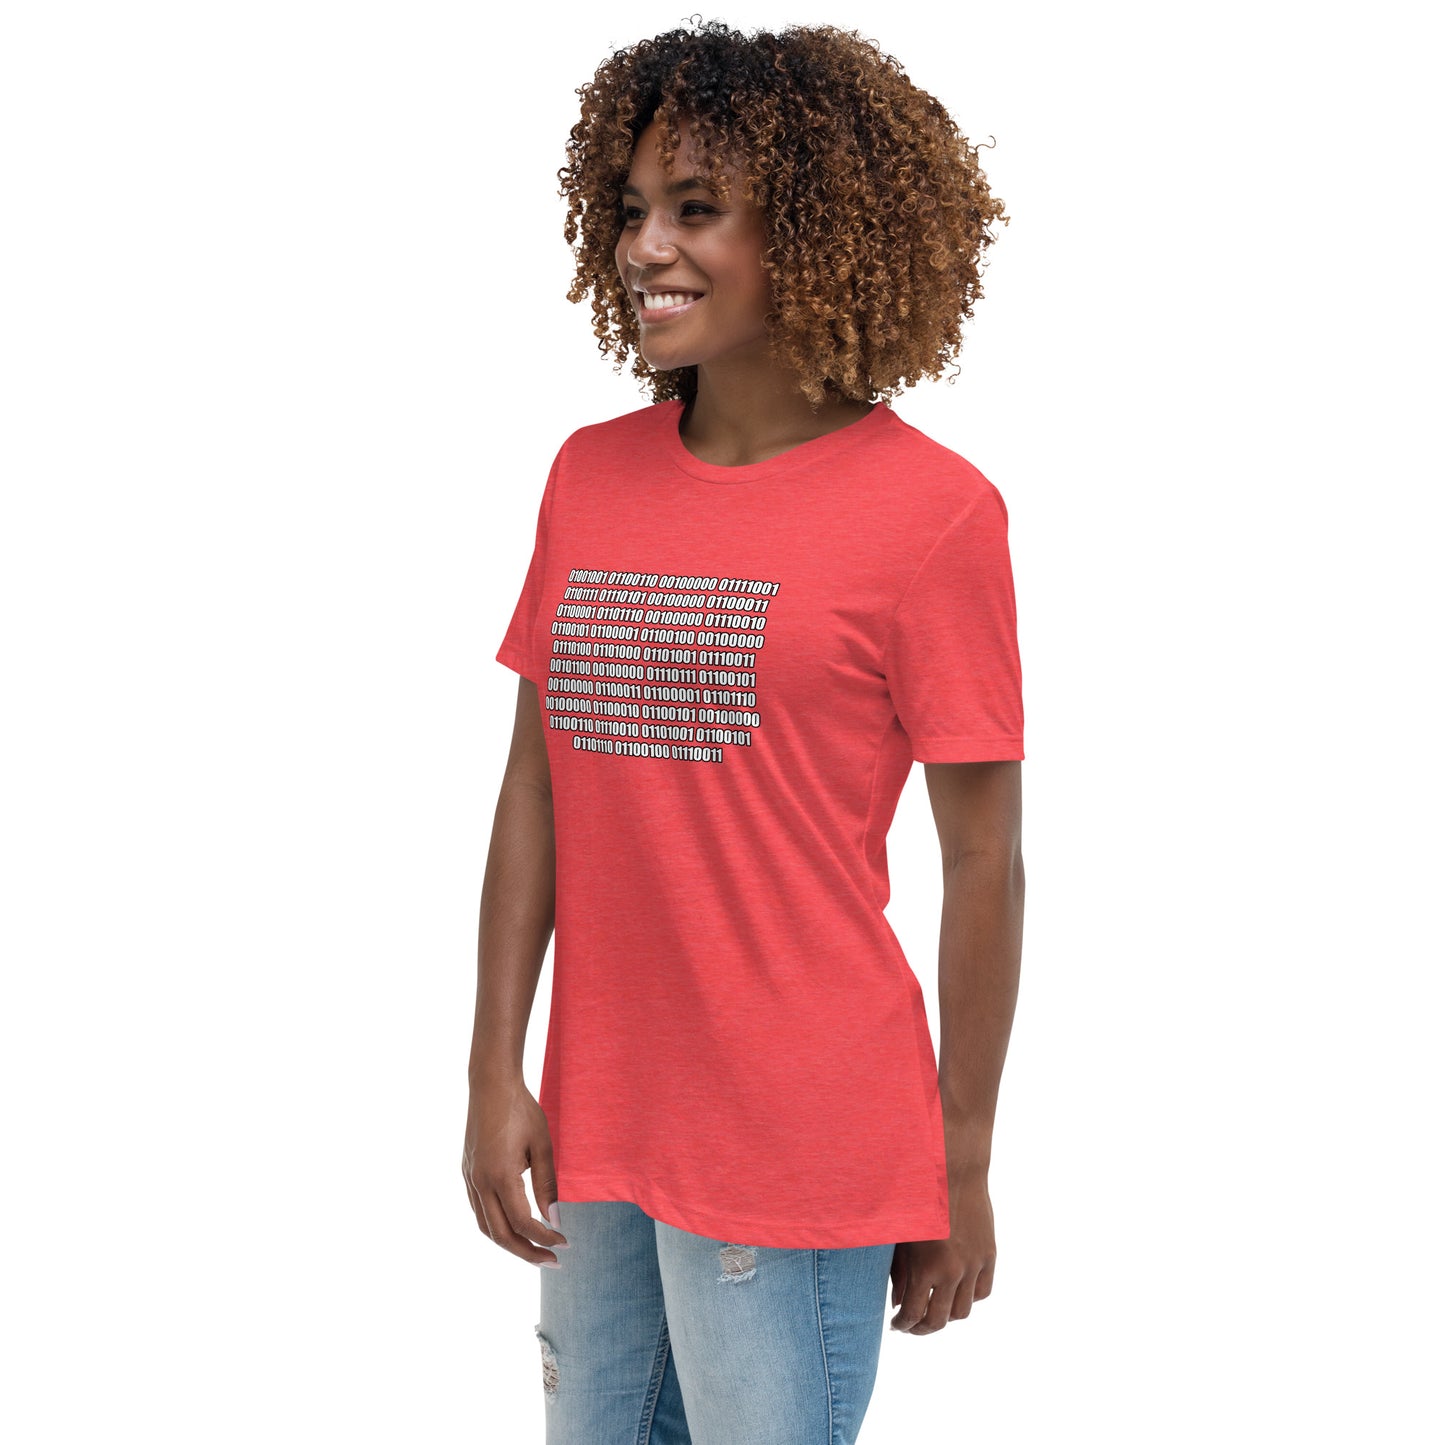 Woman with red t-shirt with binary code "If you can read this"